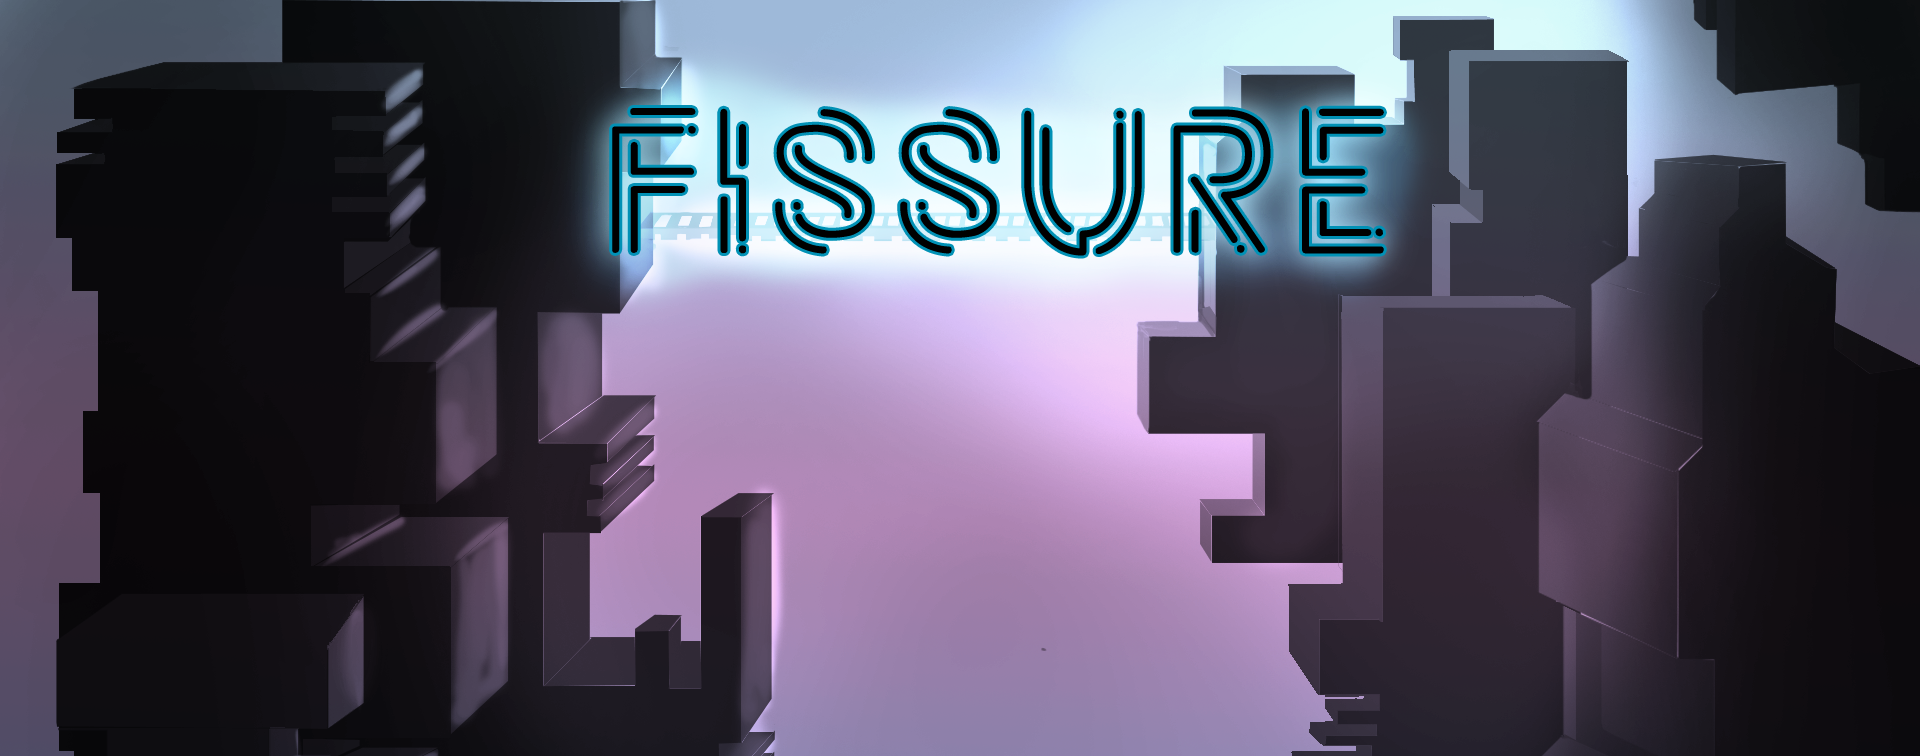 [Colombia]  Fissure